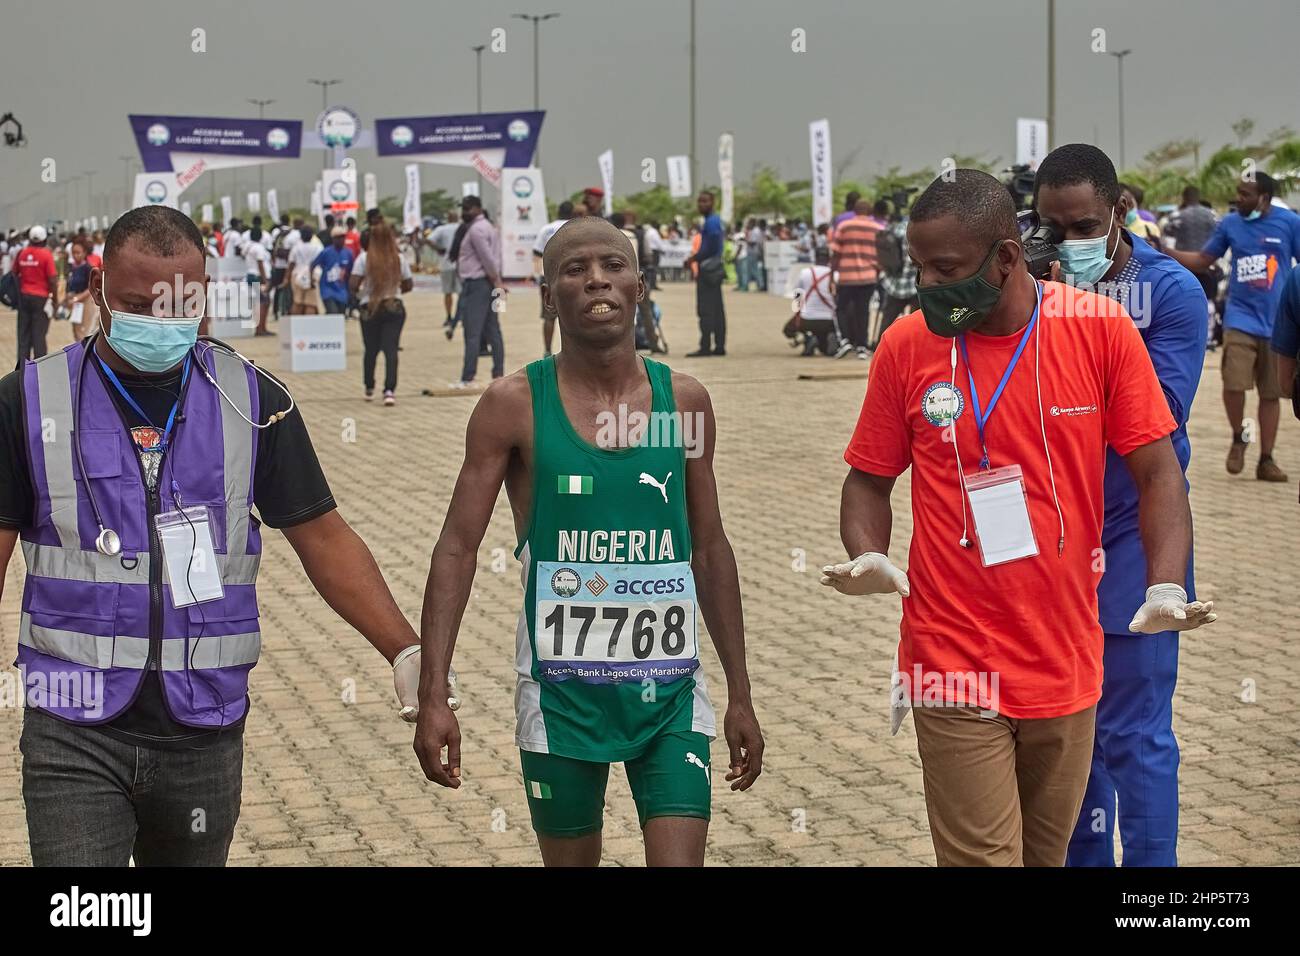 Medics help athletes after competing in the Access Bank Lagos City Marathon, a 42km Silver-Label Race held in Lagos, Nigeria on February 12, 2022. Stock Photo